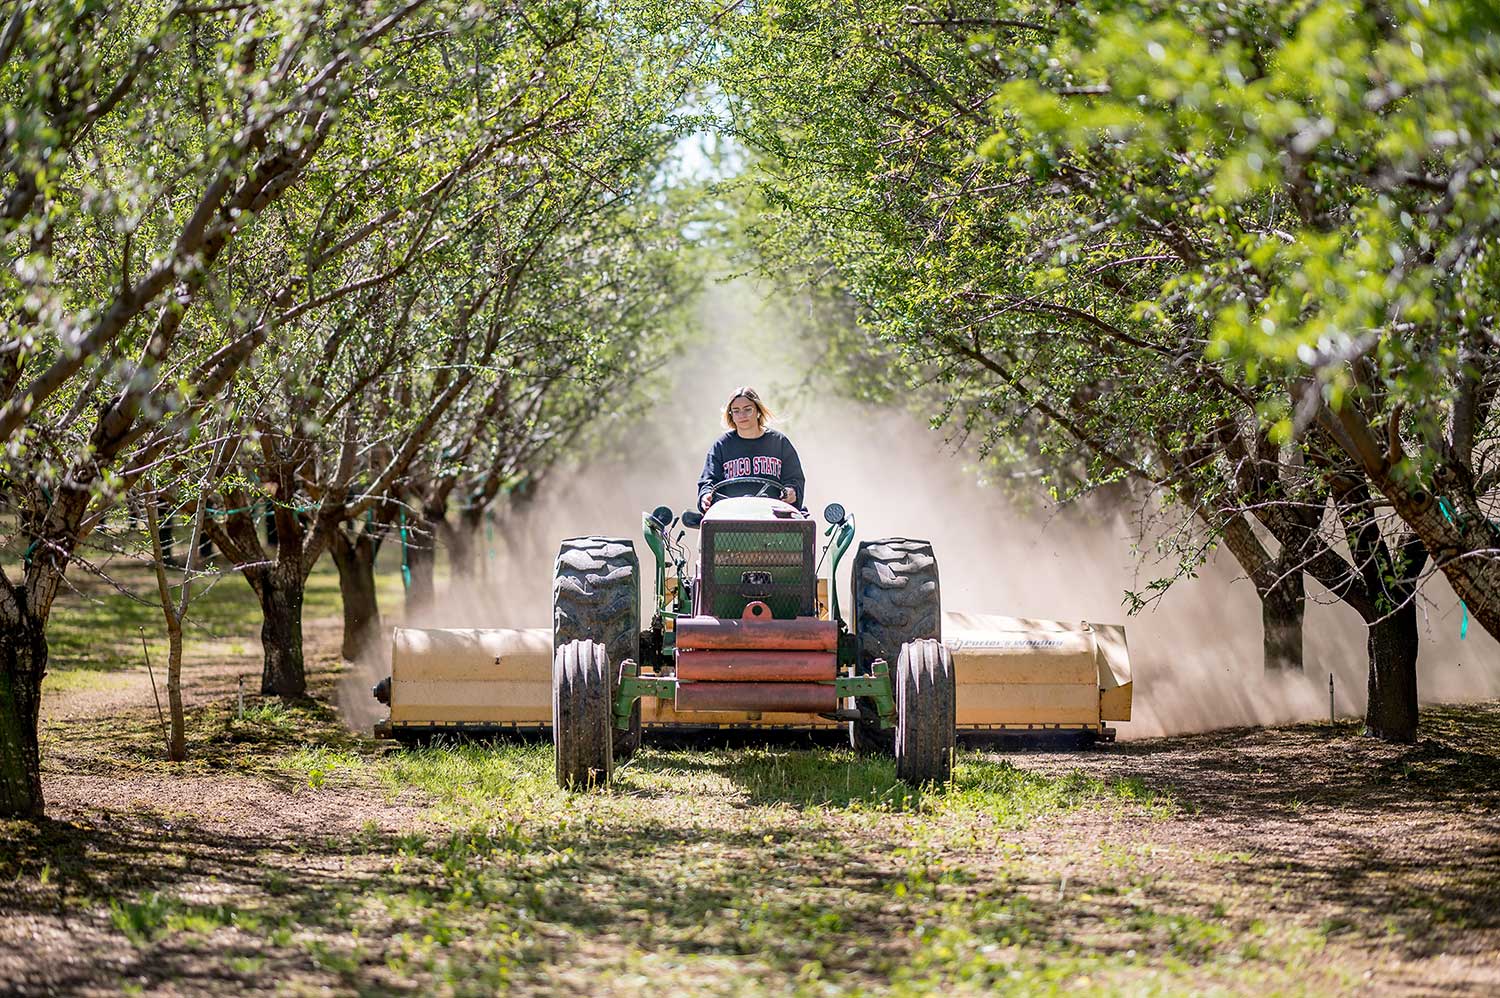 A student drives a tractor through an orchard.